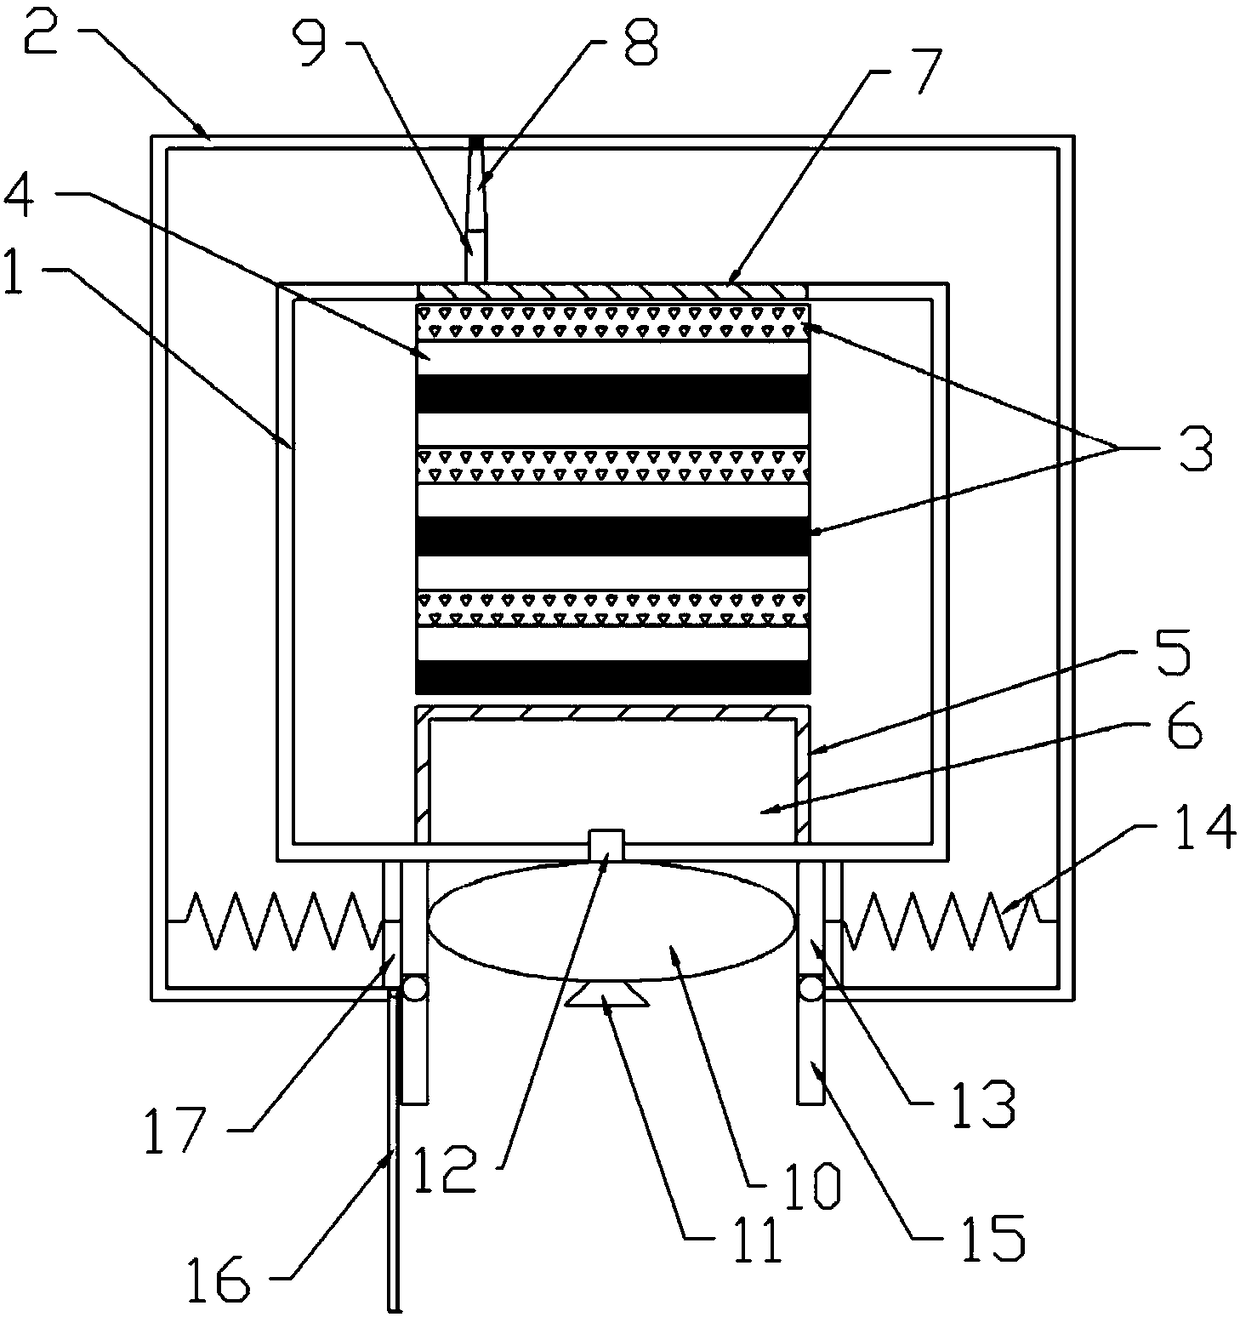 Enclosed horizontal battery structure